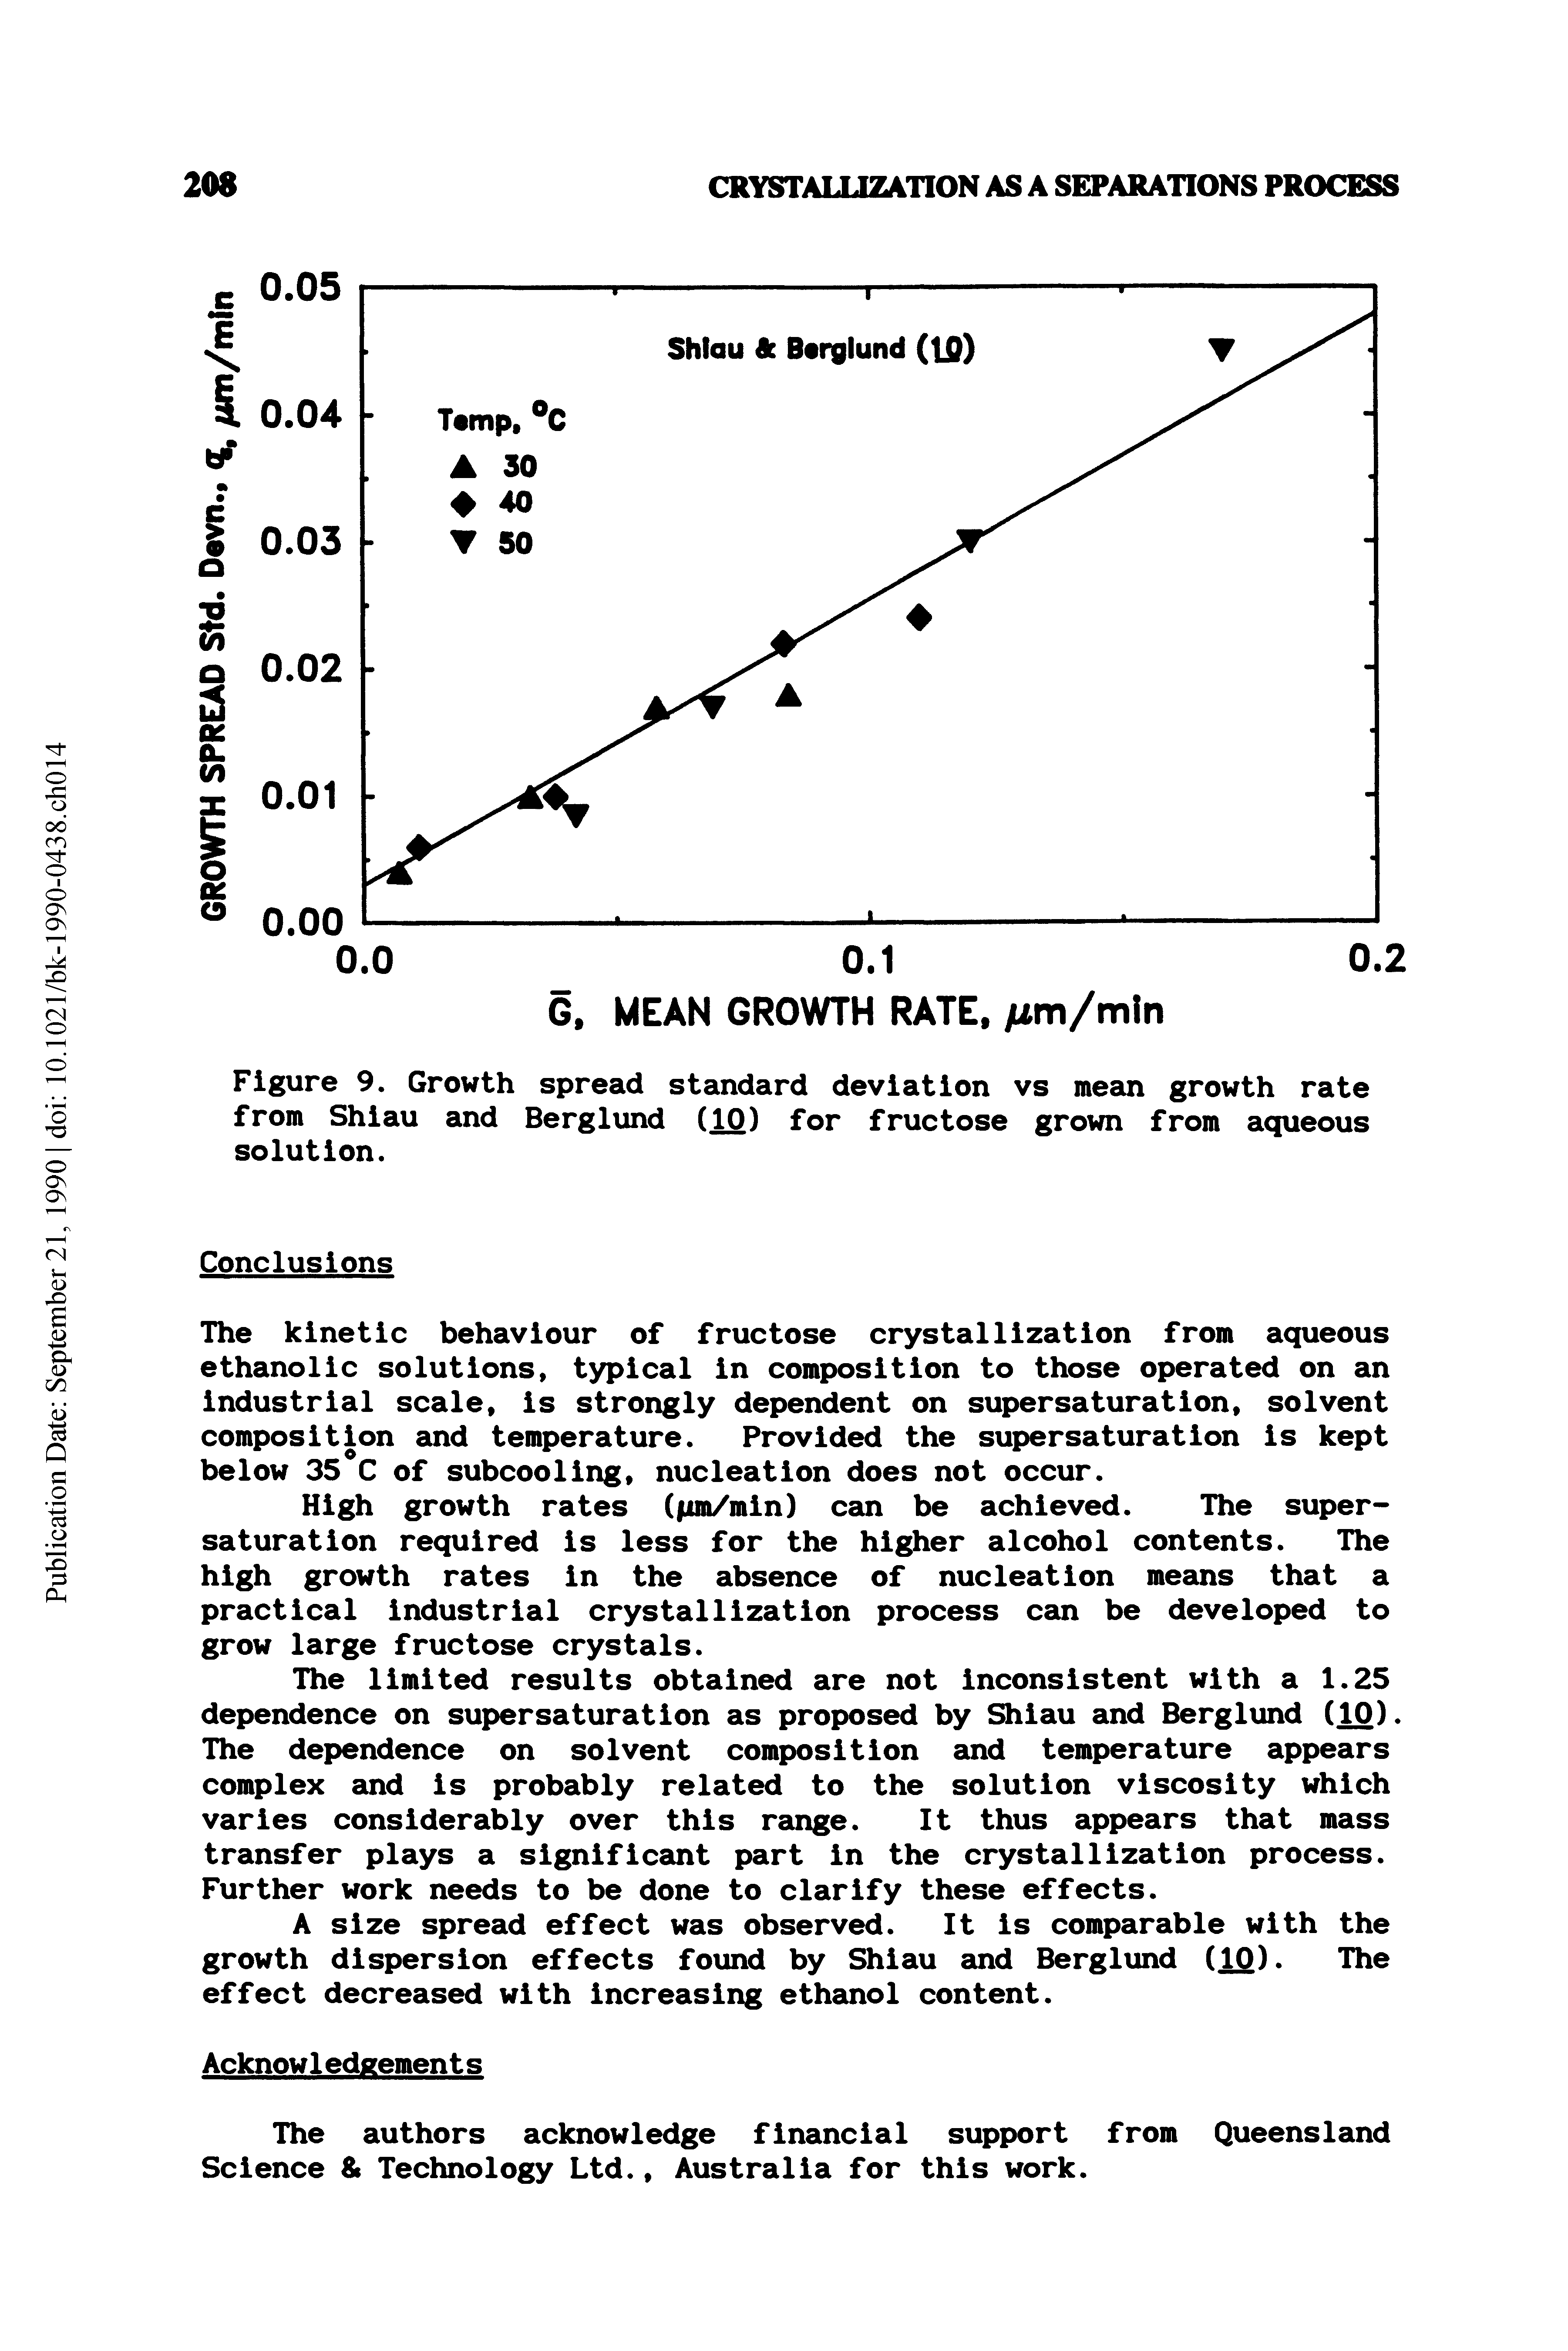 Figure 9. Growth spread standard deviation vs mean growth rate from Shlau and Berglund (10) for fructose grown from aqueous solution.